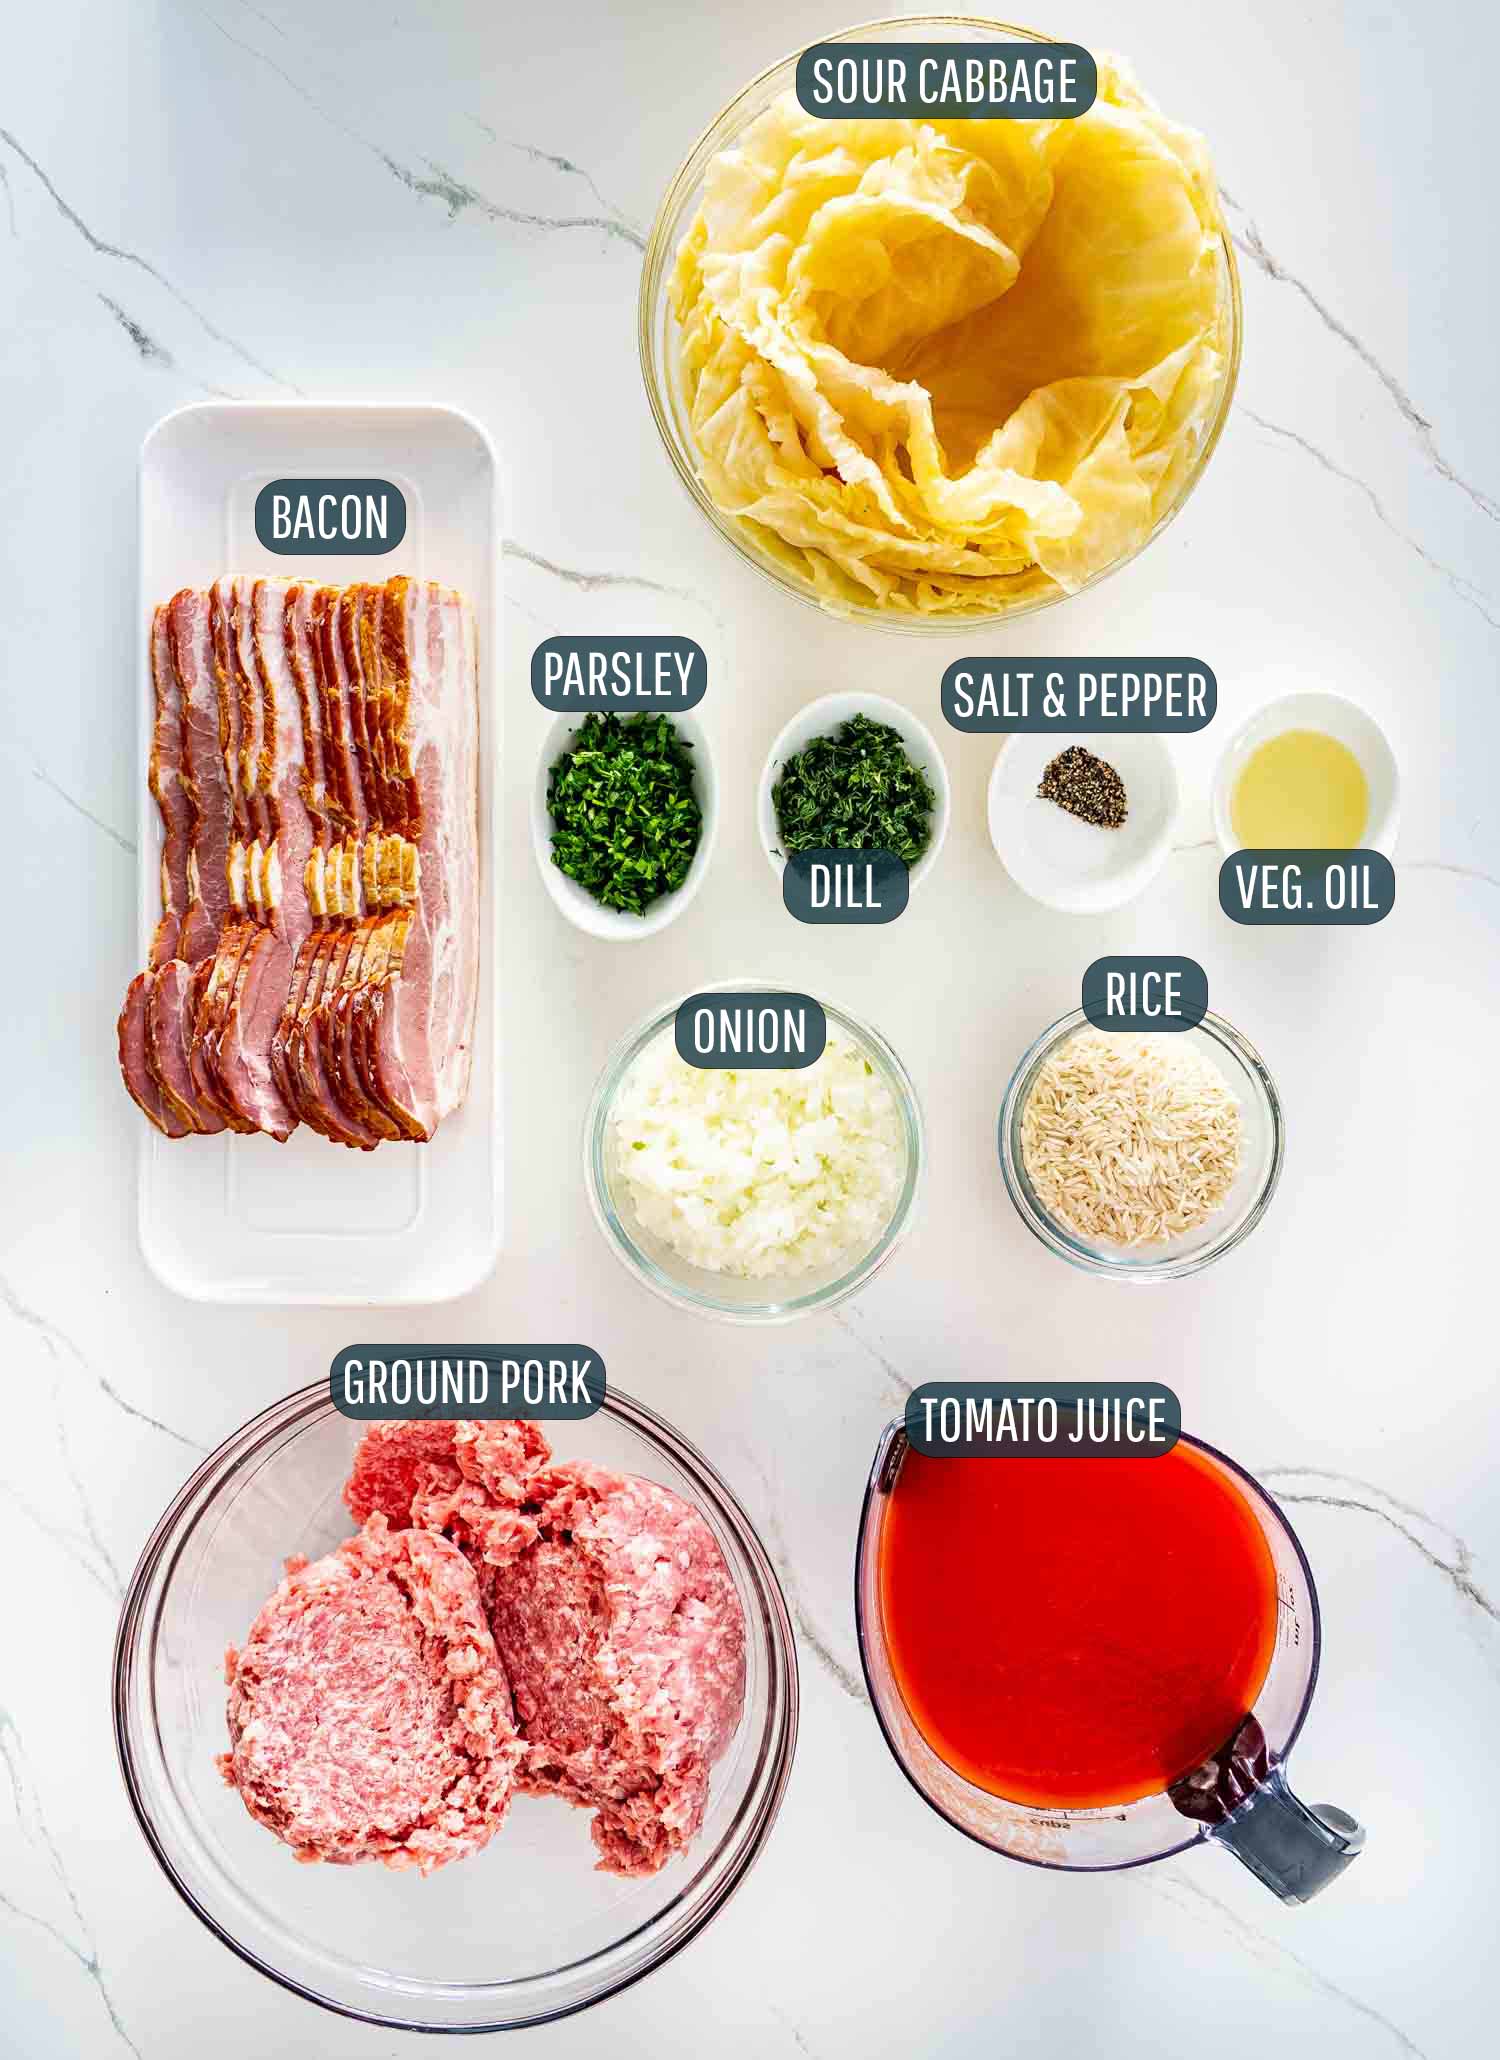 ingredients needed to make romanian cabbage rolls.